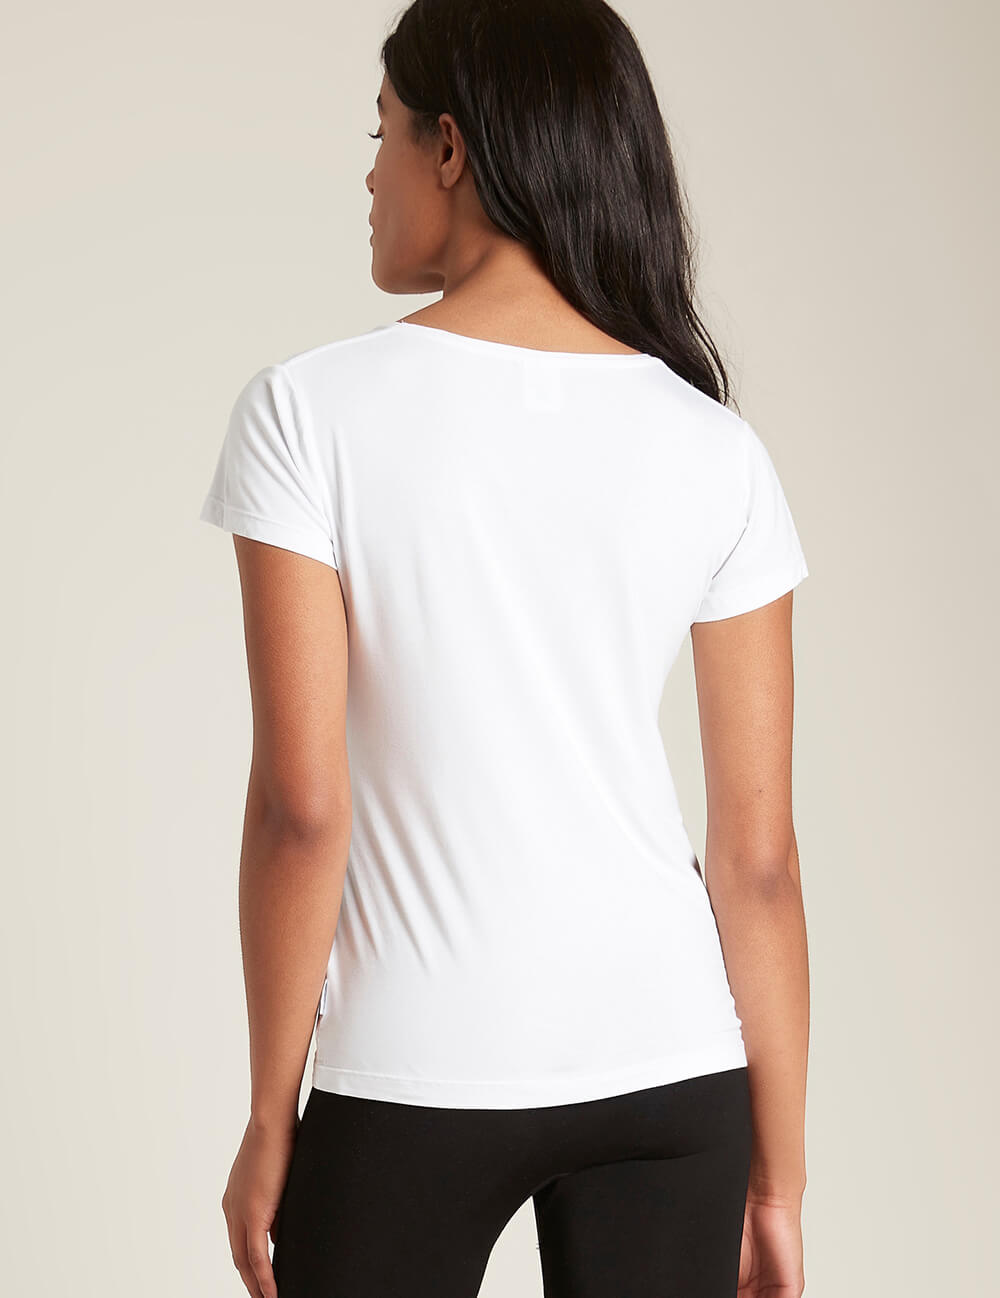 Boody Bamboo Women's V-Neck T-Shirt in White Back View